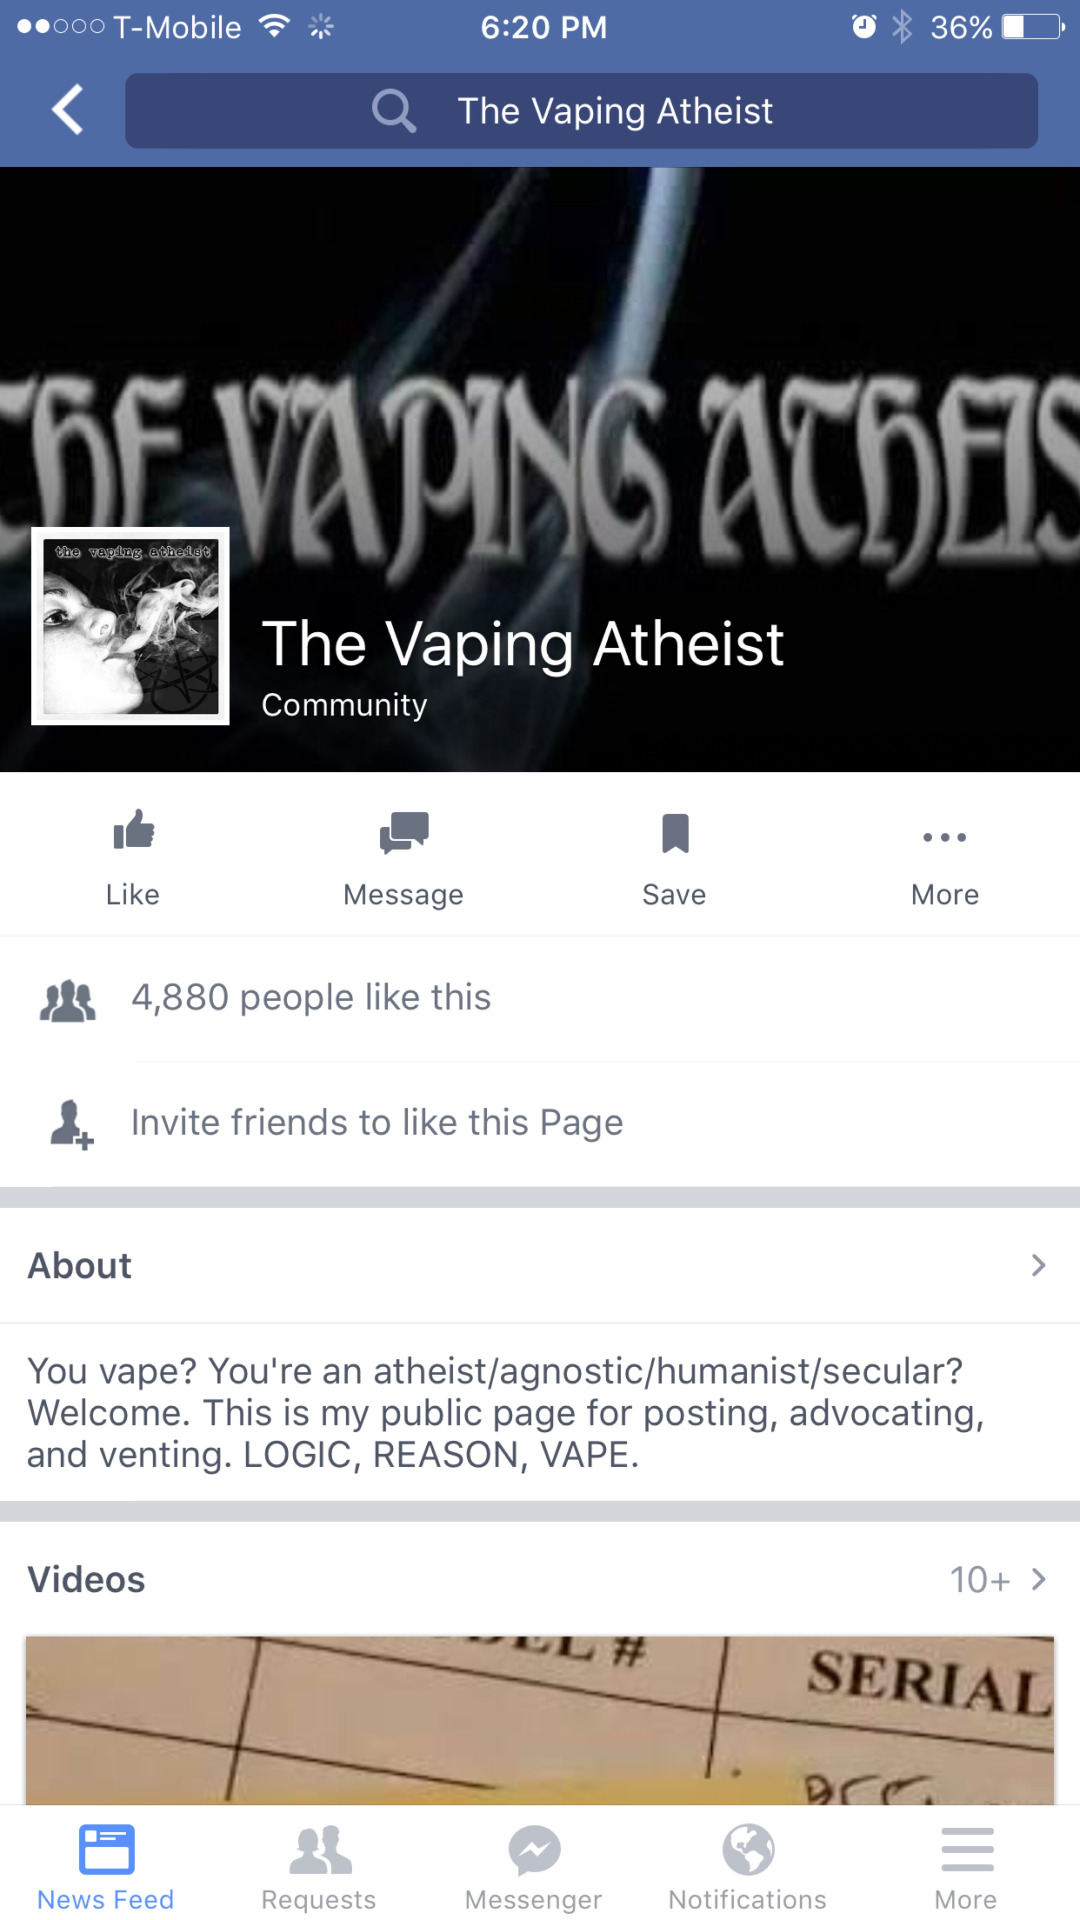 screenshot - .000 TMobile 0 36%D Q The Vaping Atheist Bevaping Achis the vaping atheist The Vaping Atheist Community Message Save More 4,880 people this & Invite friends to this Page About You vape? You're an atheistagnostichumanistsecular? Welcome. This 